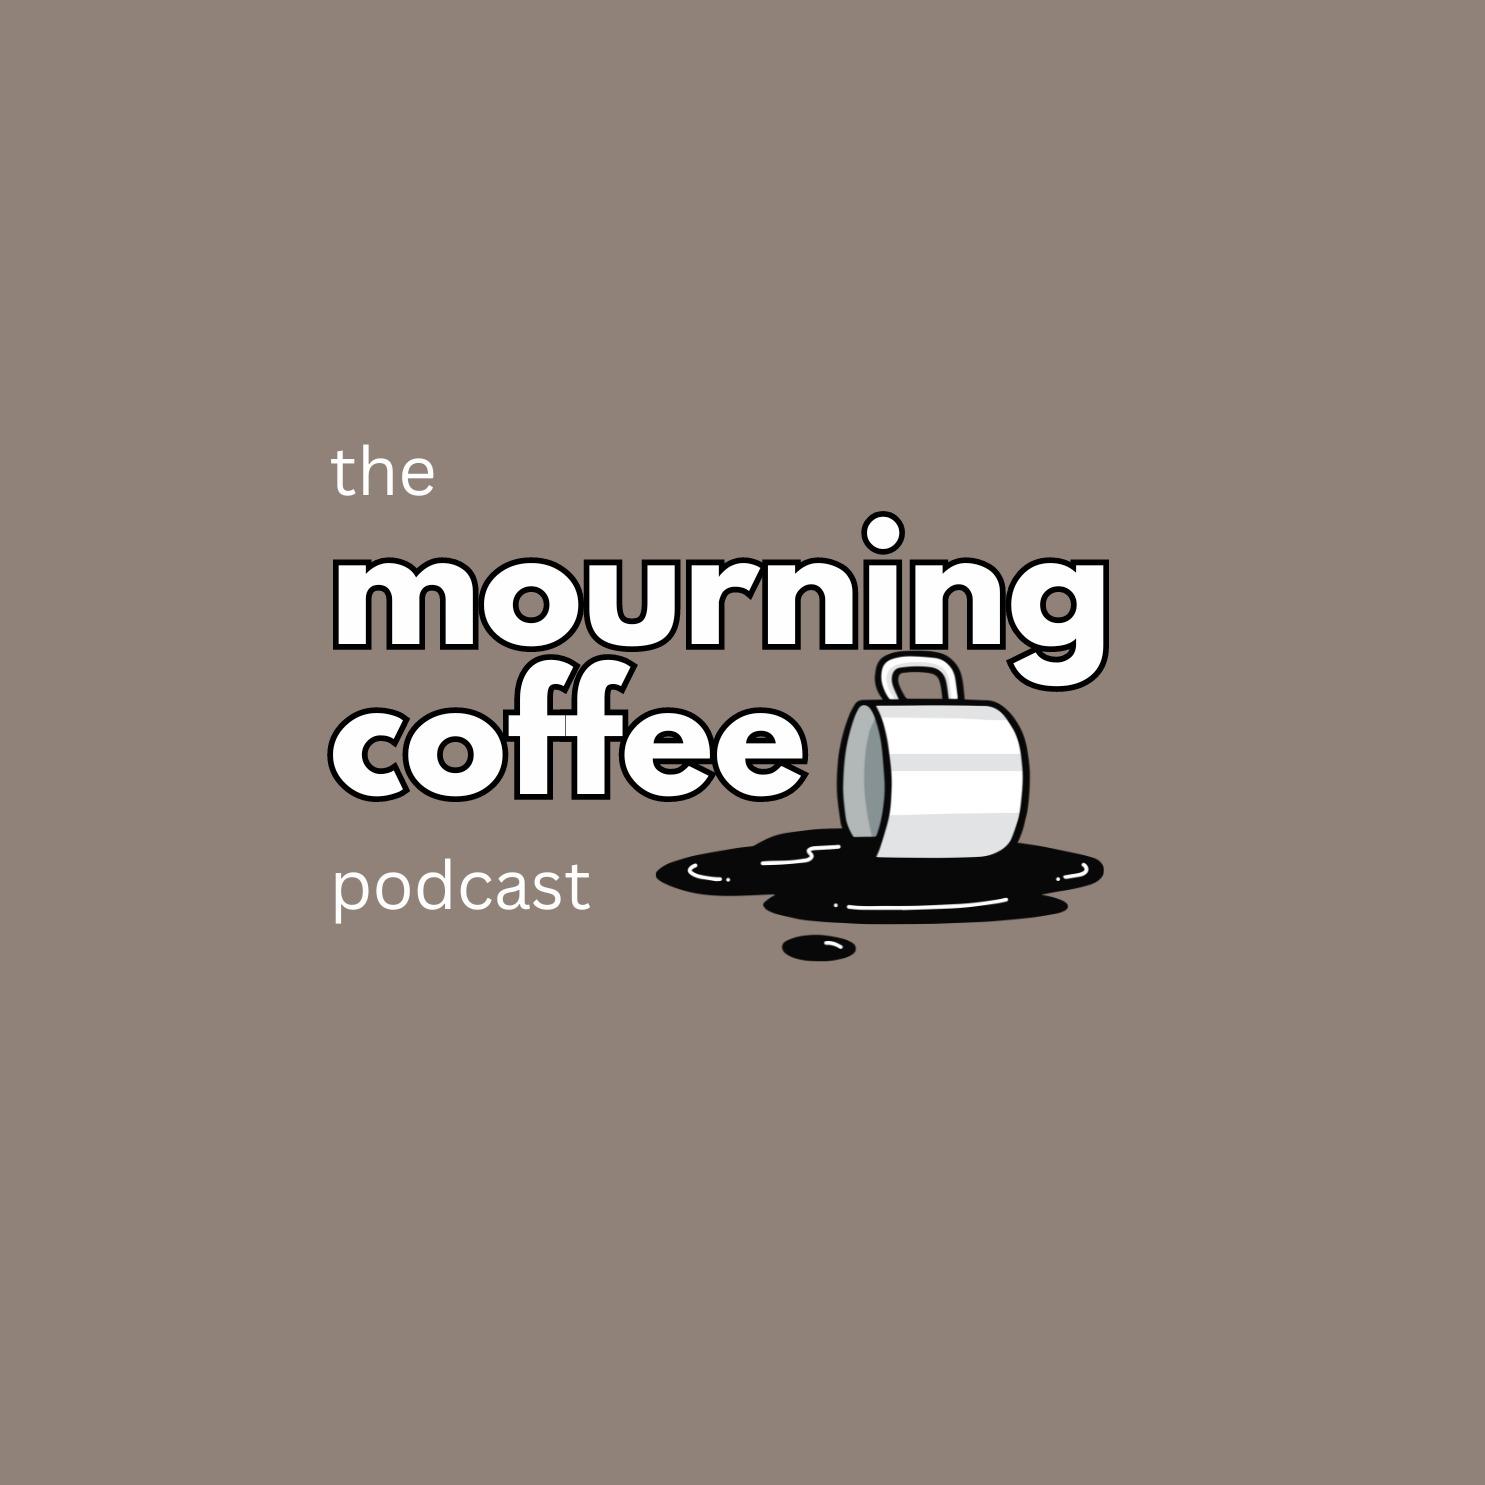 The Mourning Coffee Podcast